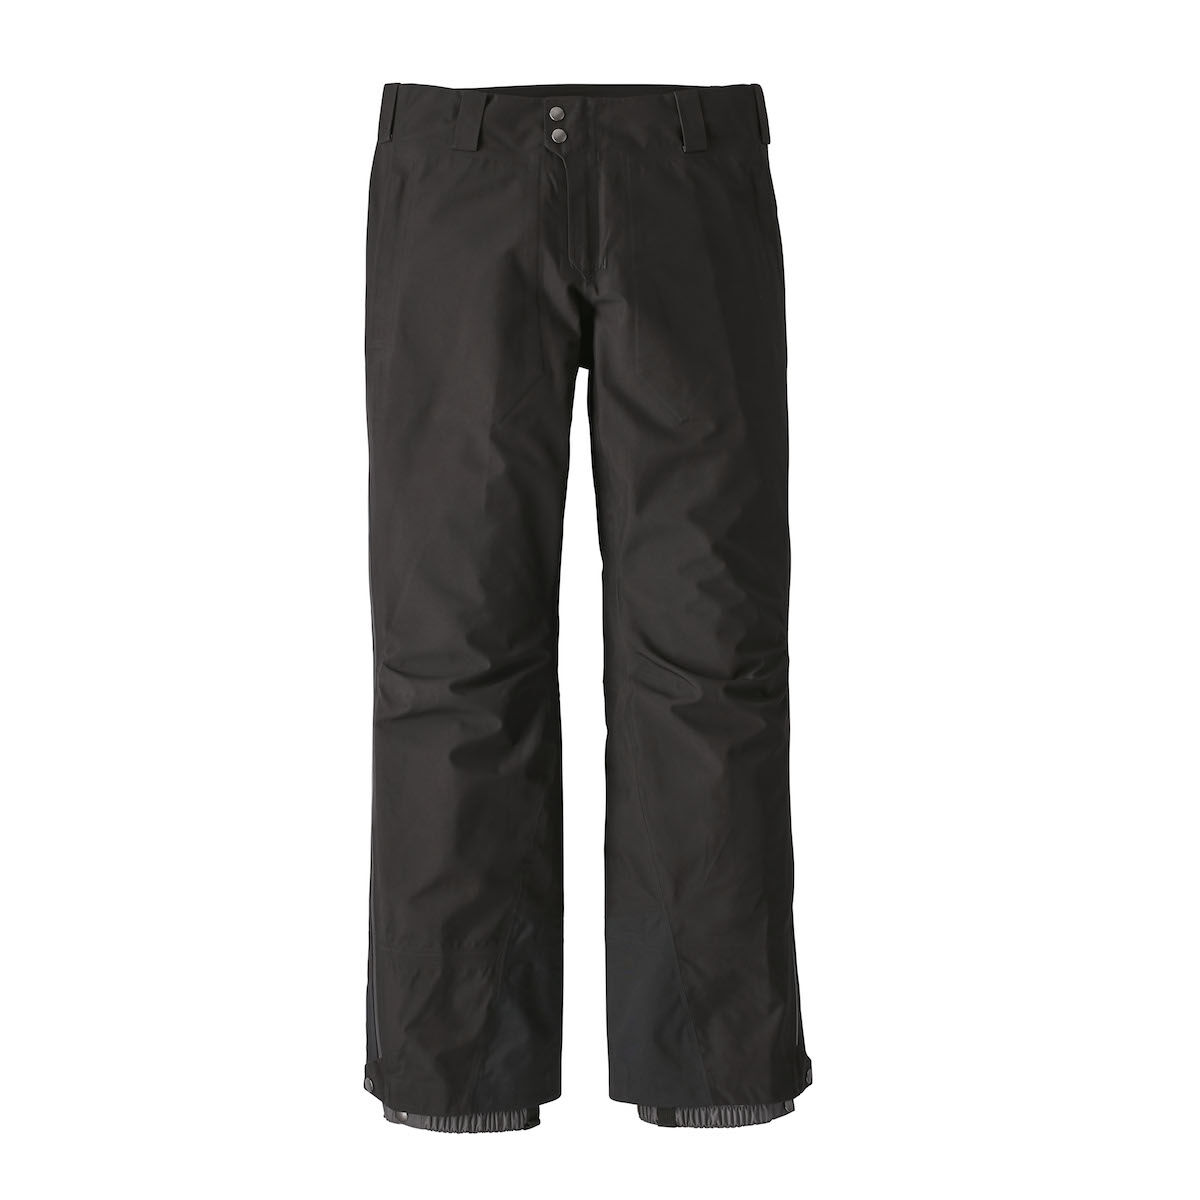 Patagonia - Triolet Pants - Mountaineering trousers - Men's